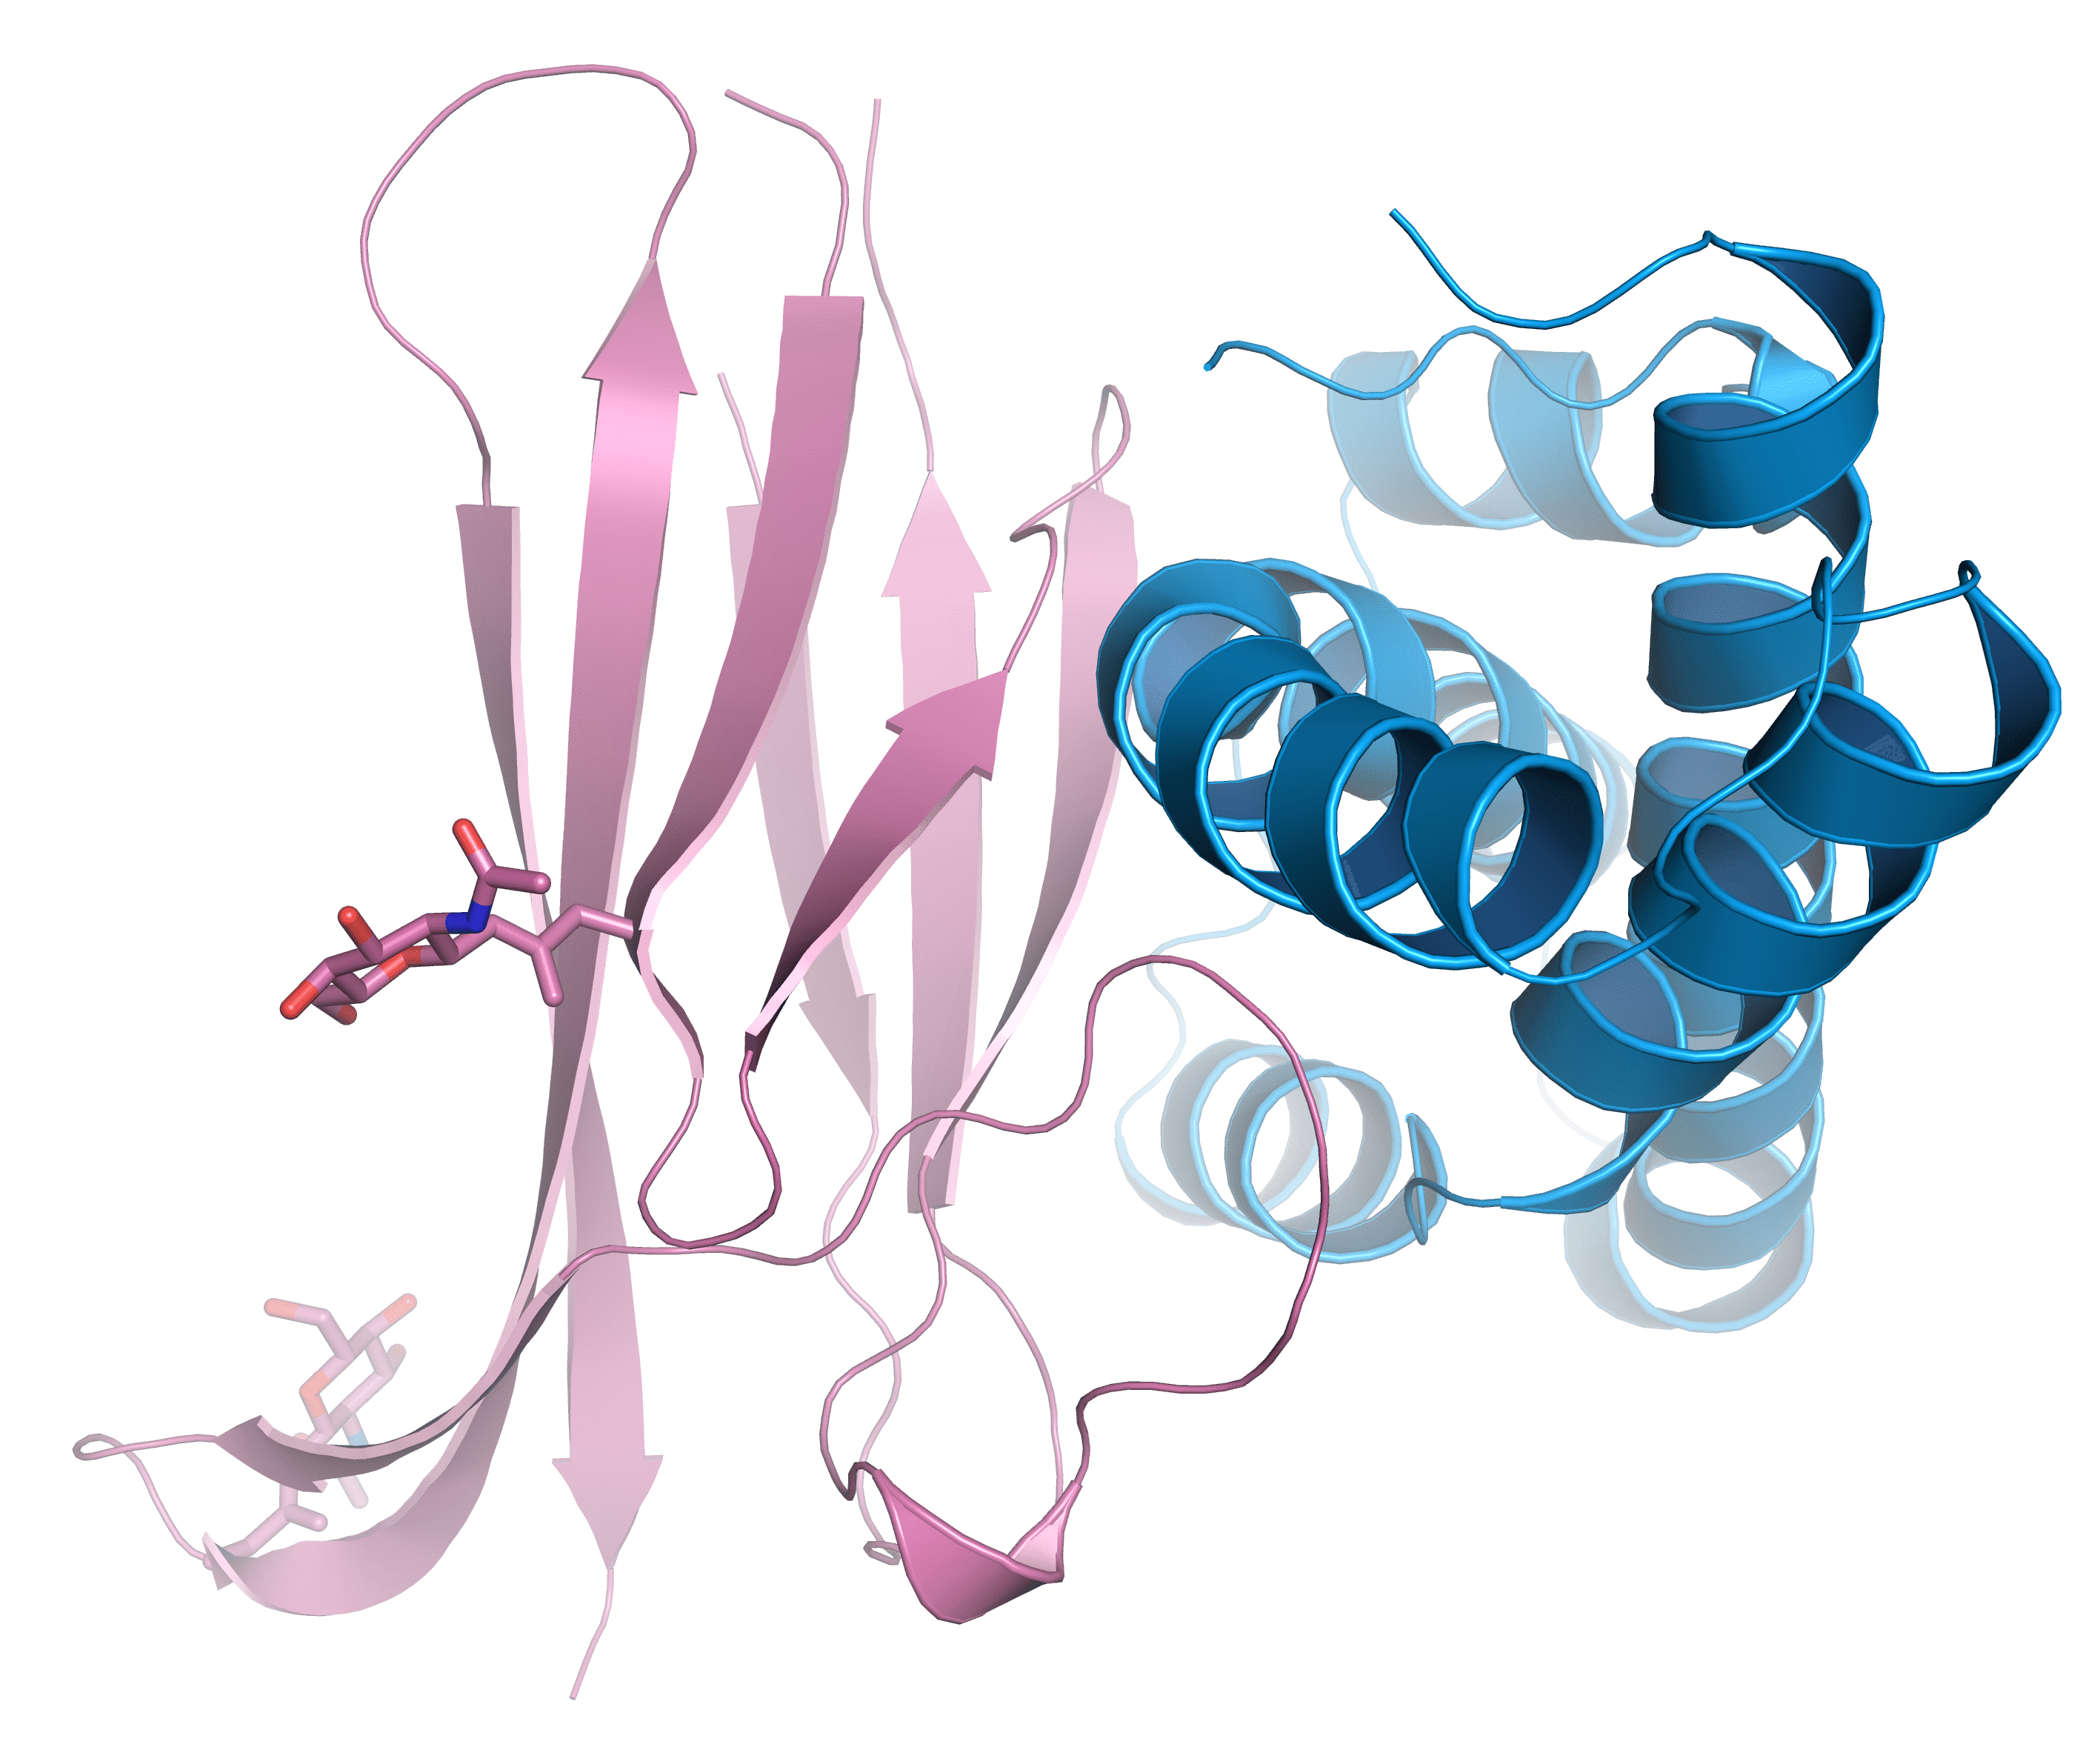 Crystal structure of the complex between a domain repeat of egg coat protein VERL (dark pink) and cognate sperm protein lysin (blue). Artwork by Isha Raj and Luca Jovine.